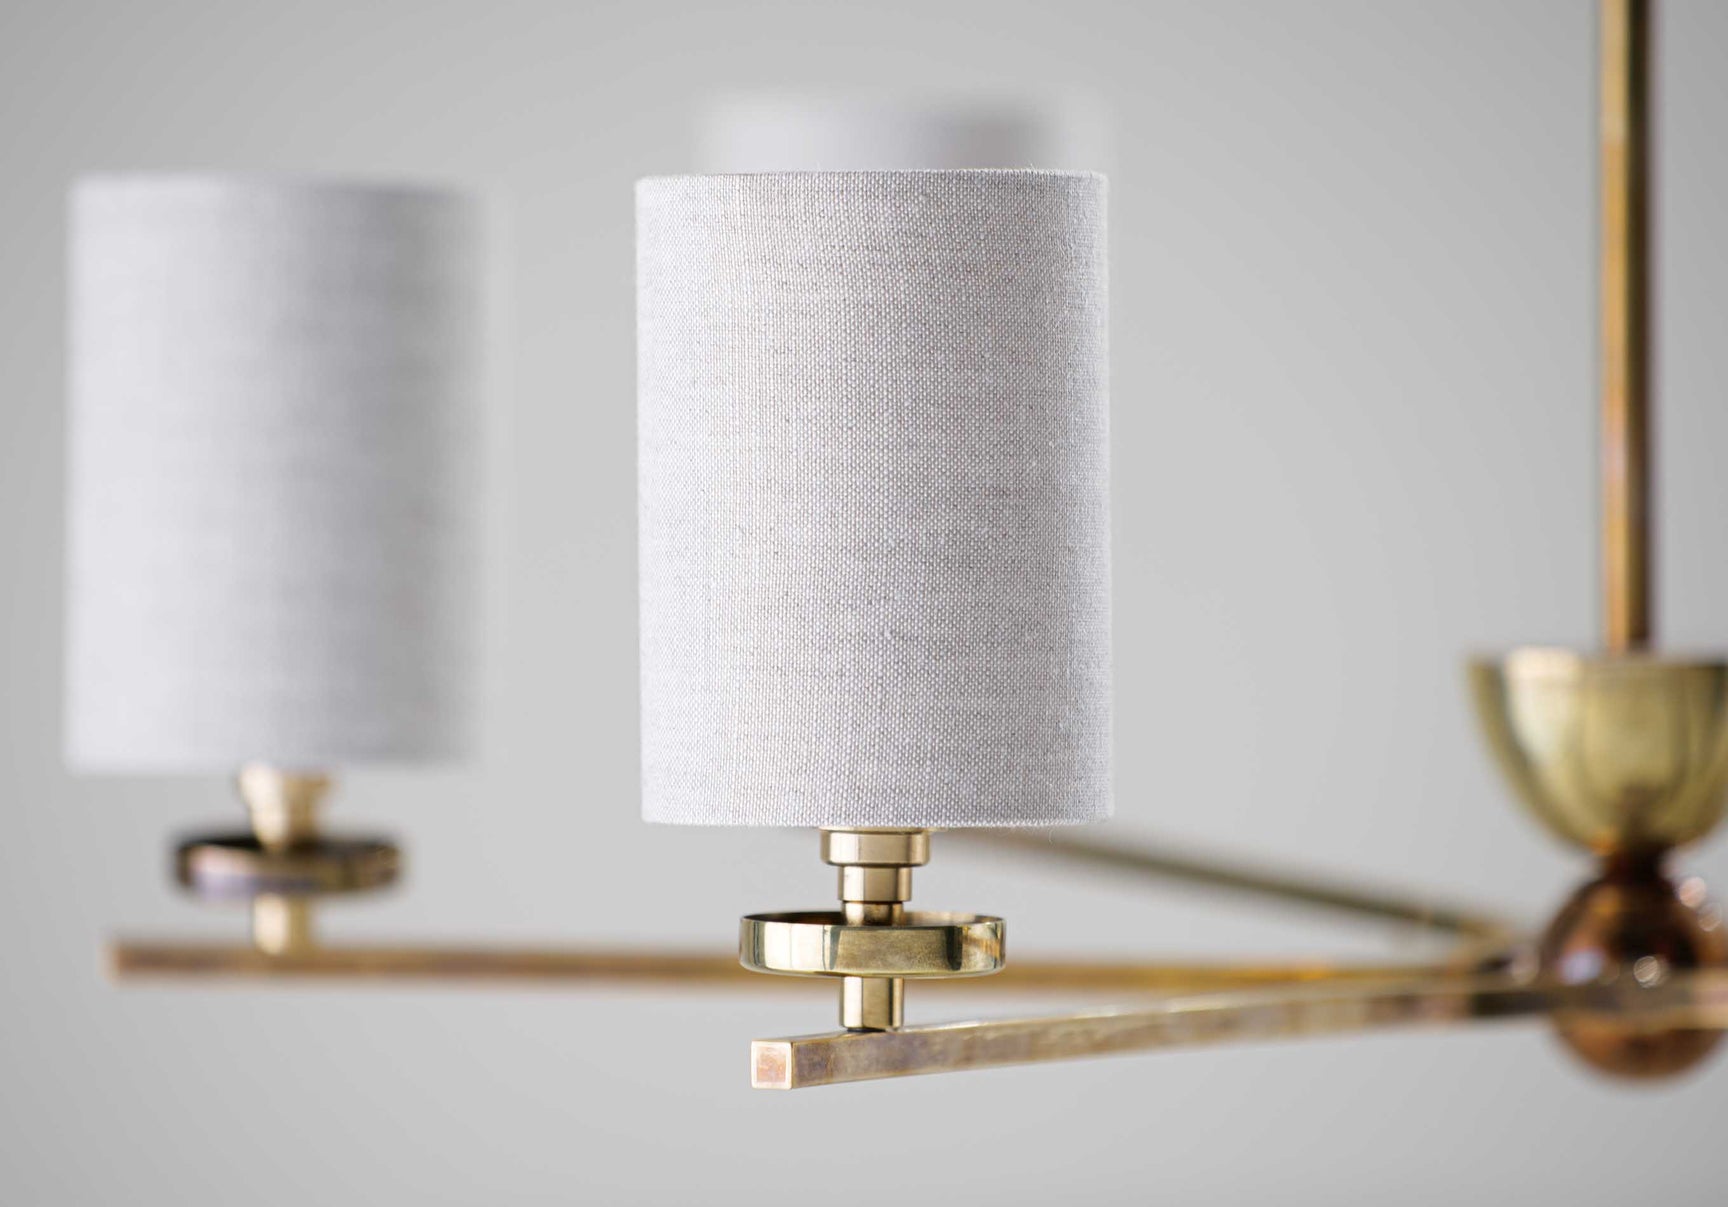 Antiqued Brass with 6 x 3.5" Top Hat lampshades in Natural Linen with Cream Card lining